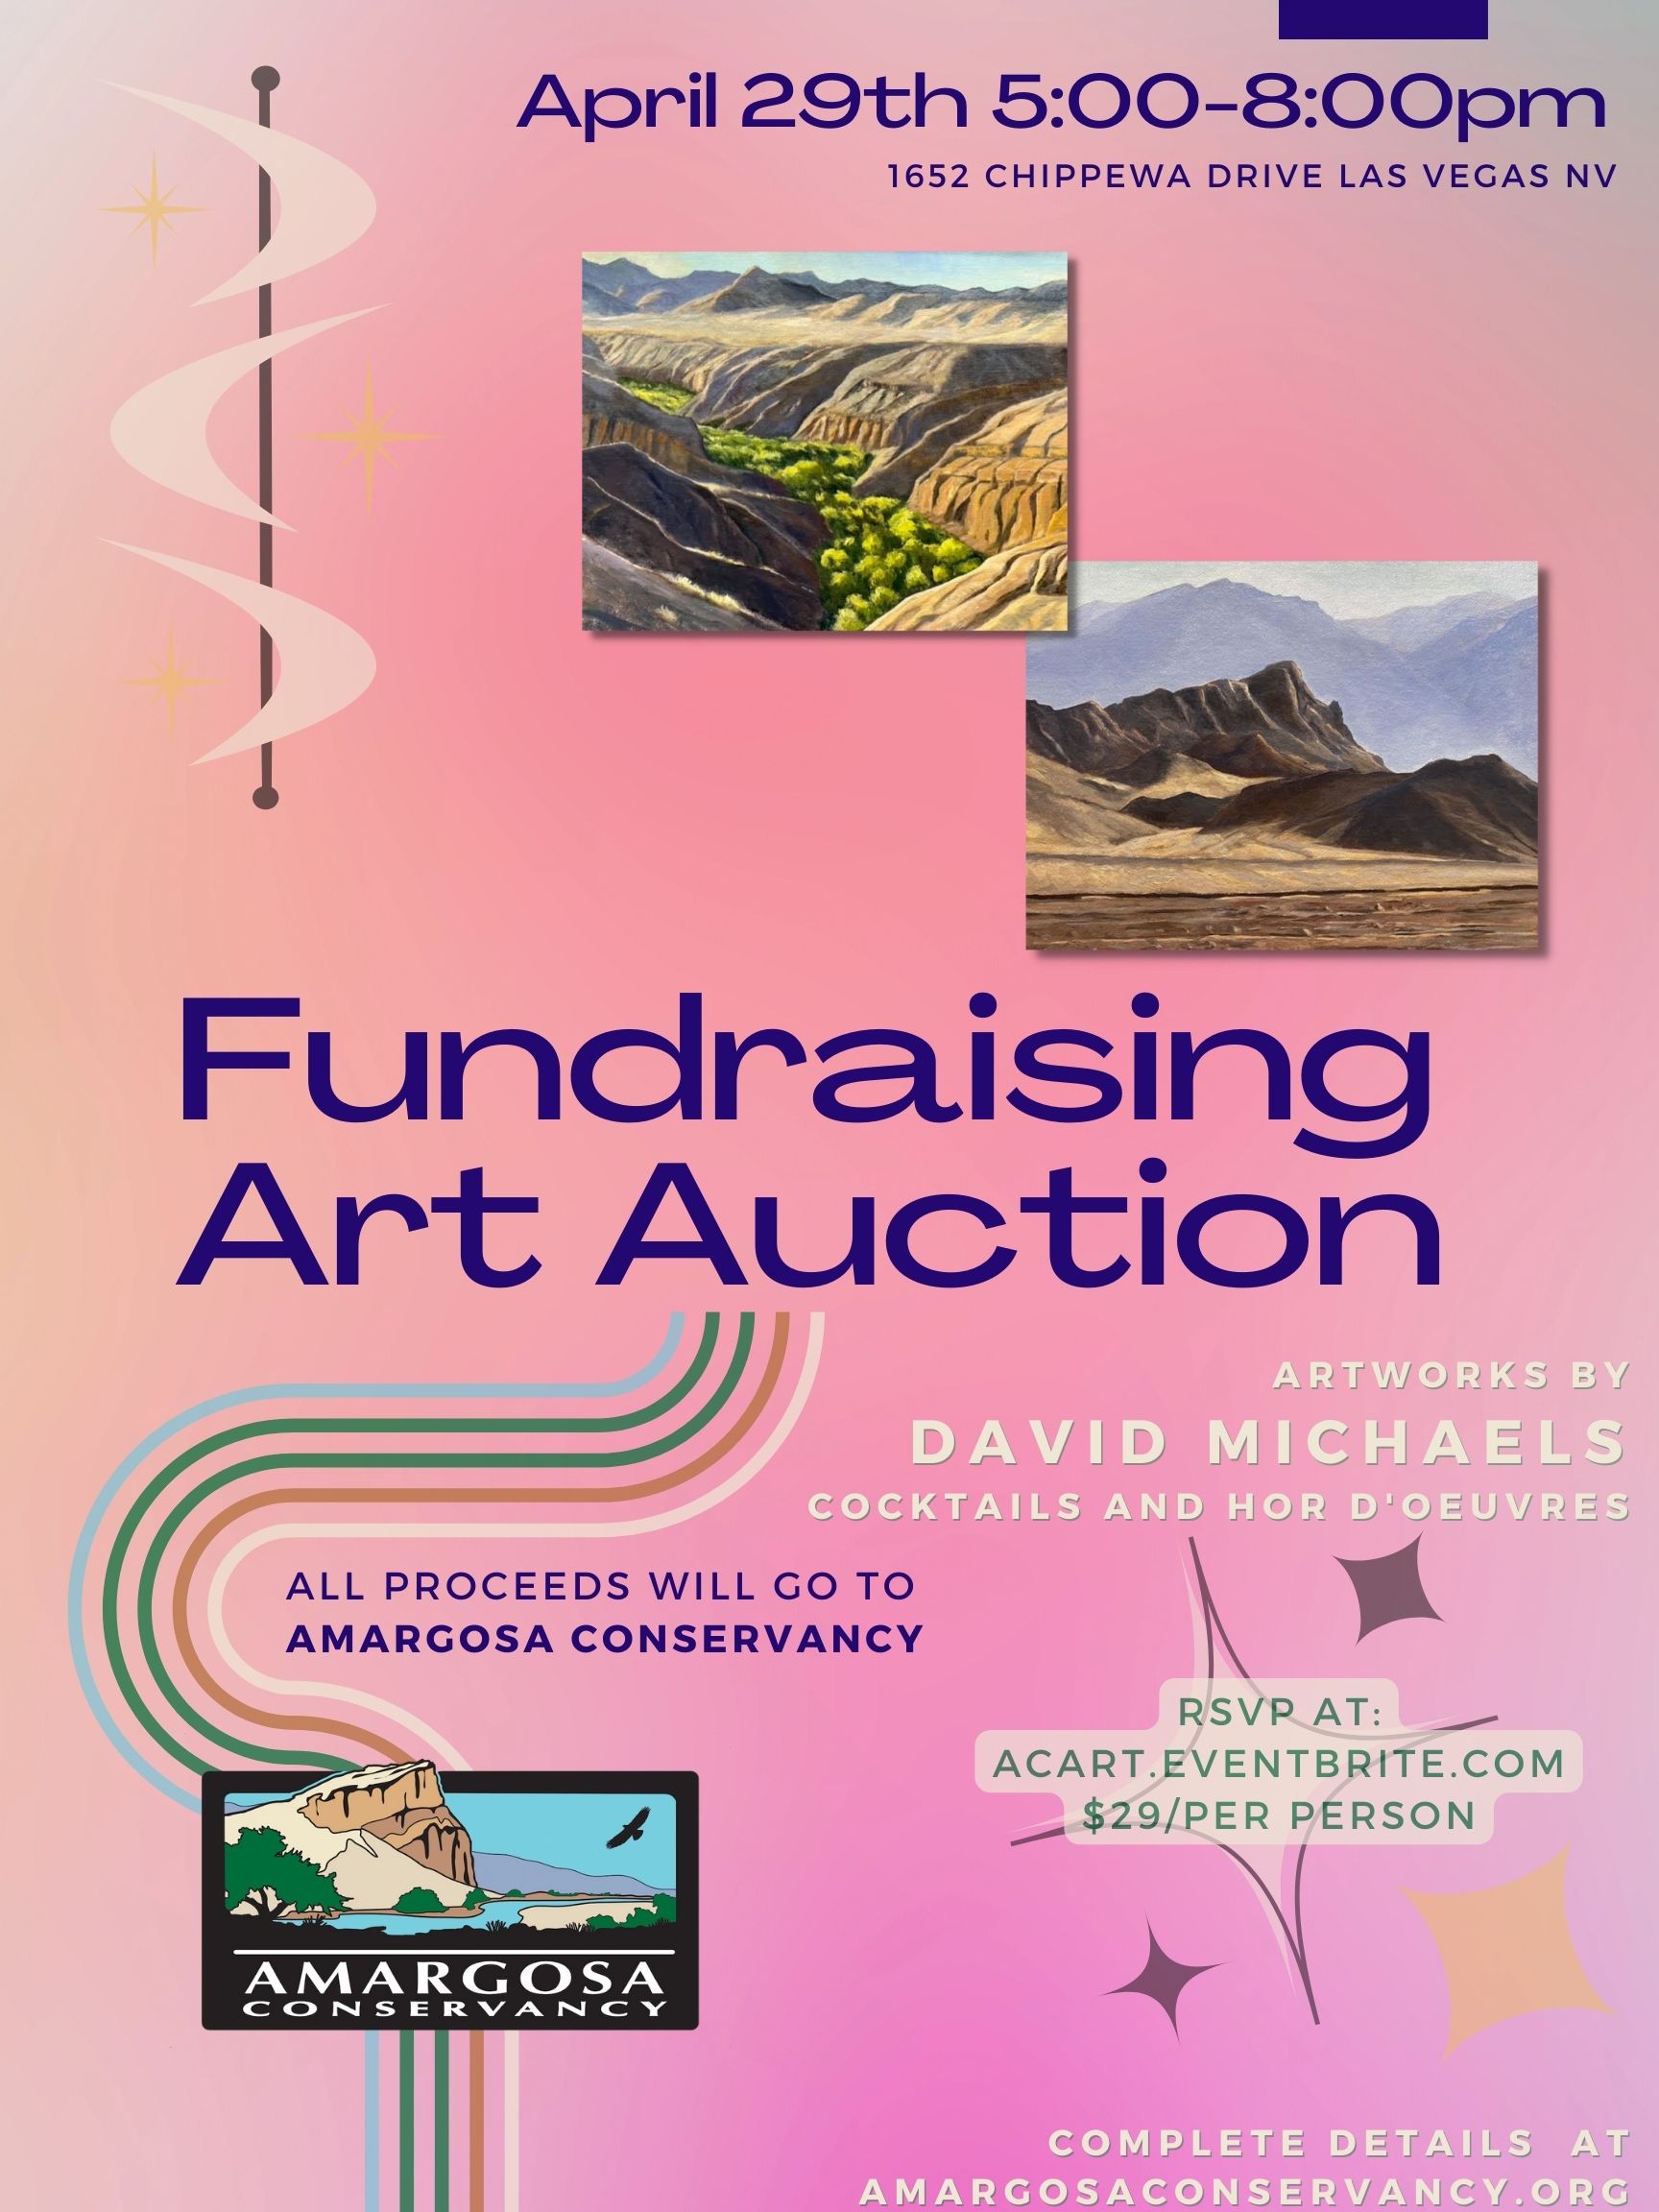 Art Auction Fundraiser featuring work by David Michaels